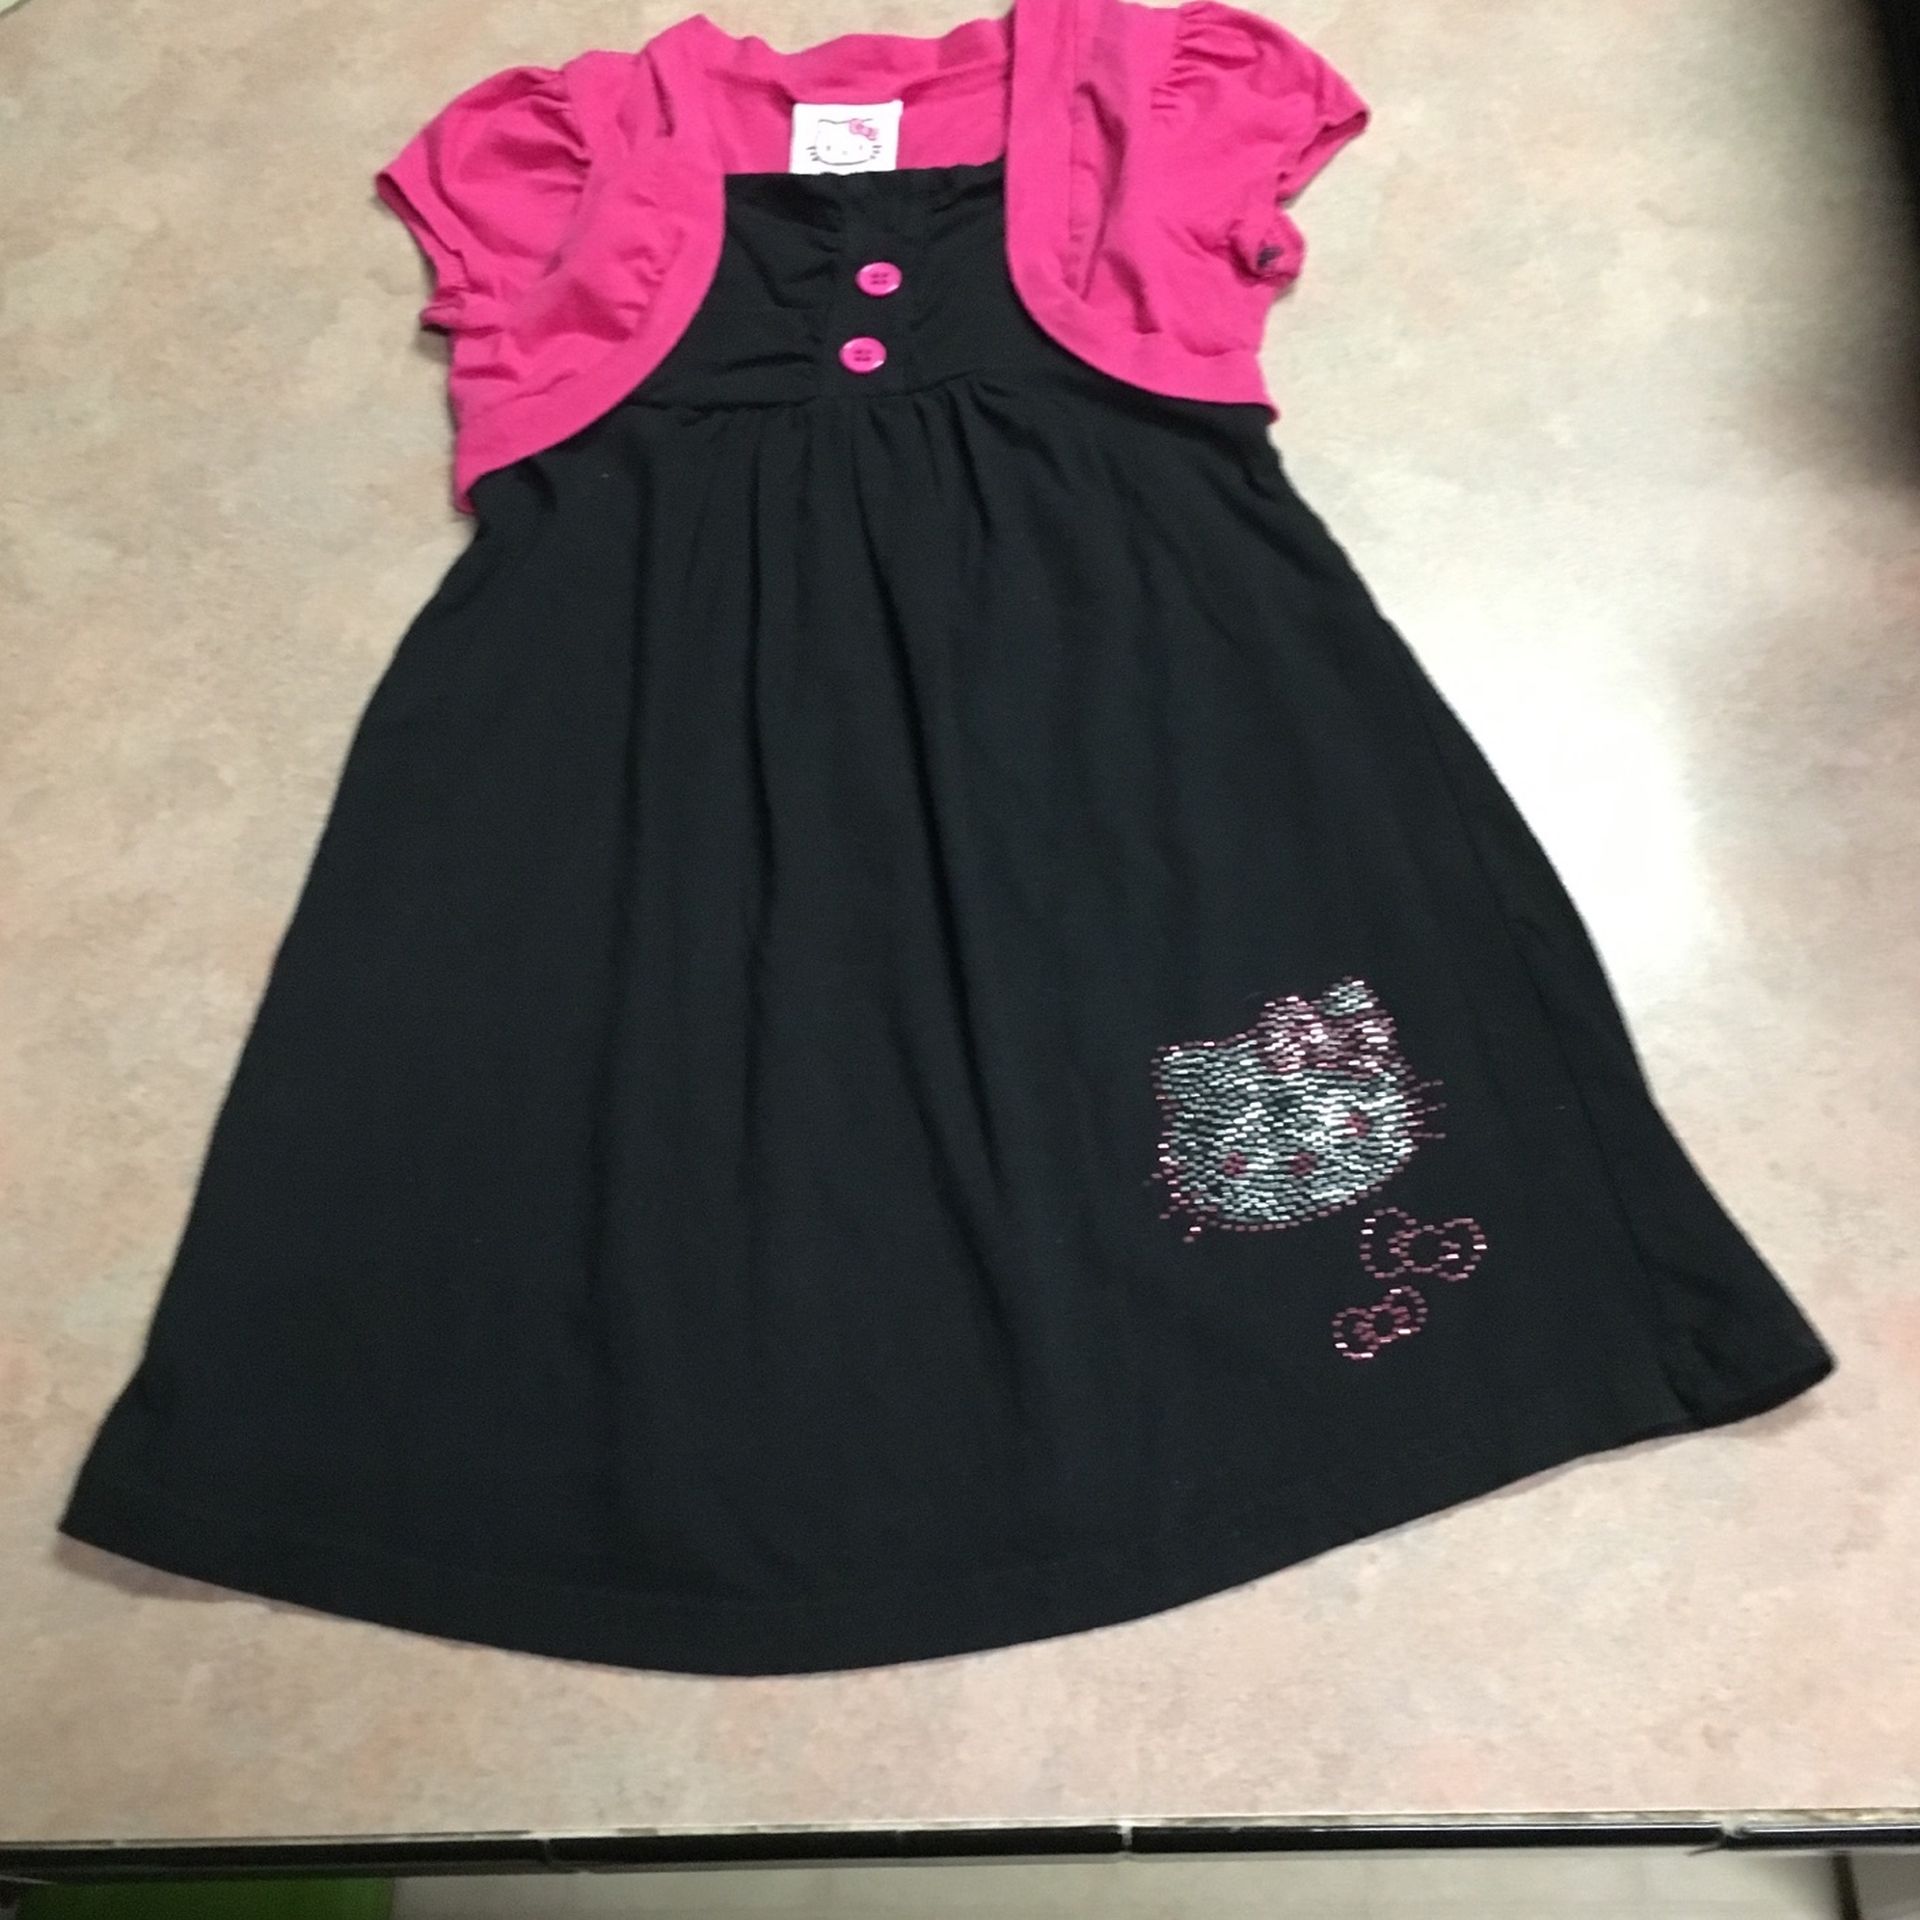 This is a cute hello Kitty dress for a little girl. It is a size 6 (T-1)